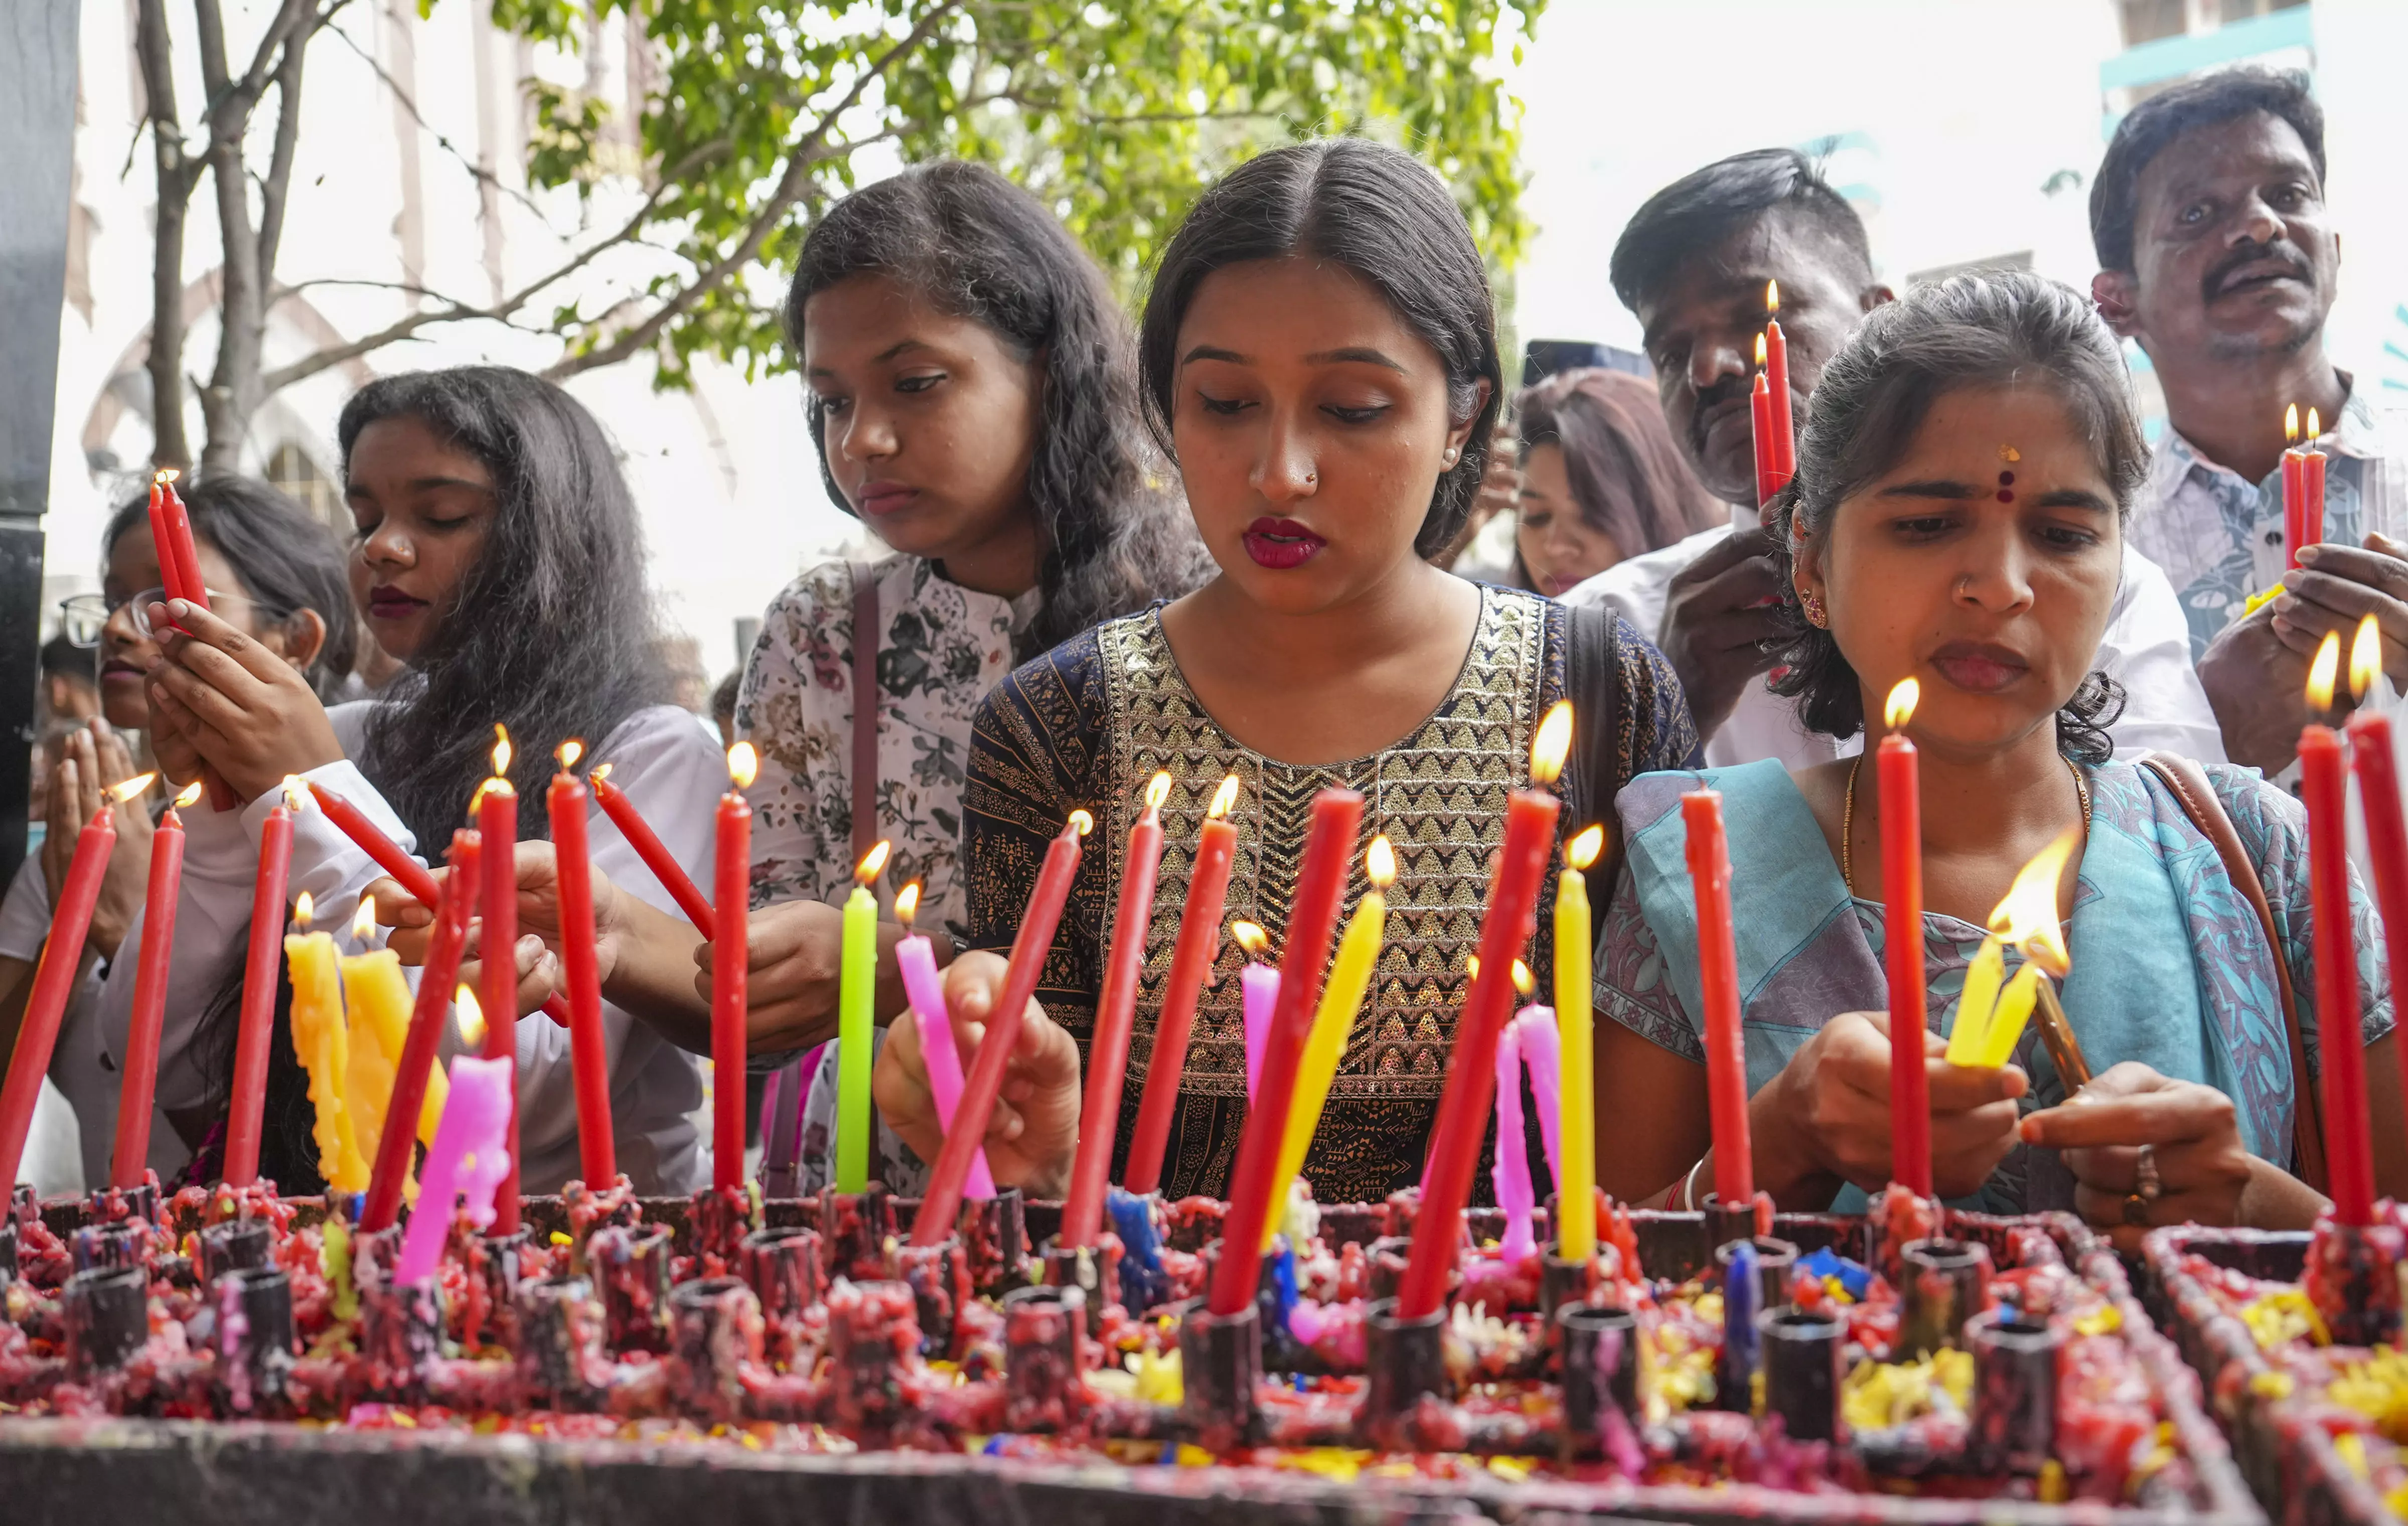 Yuletide spirit grips nation as people celebrate Christmas with fervour